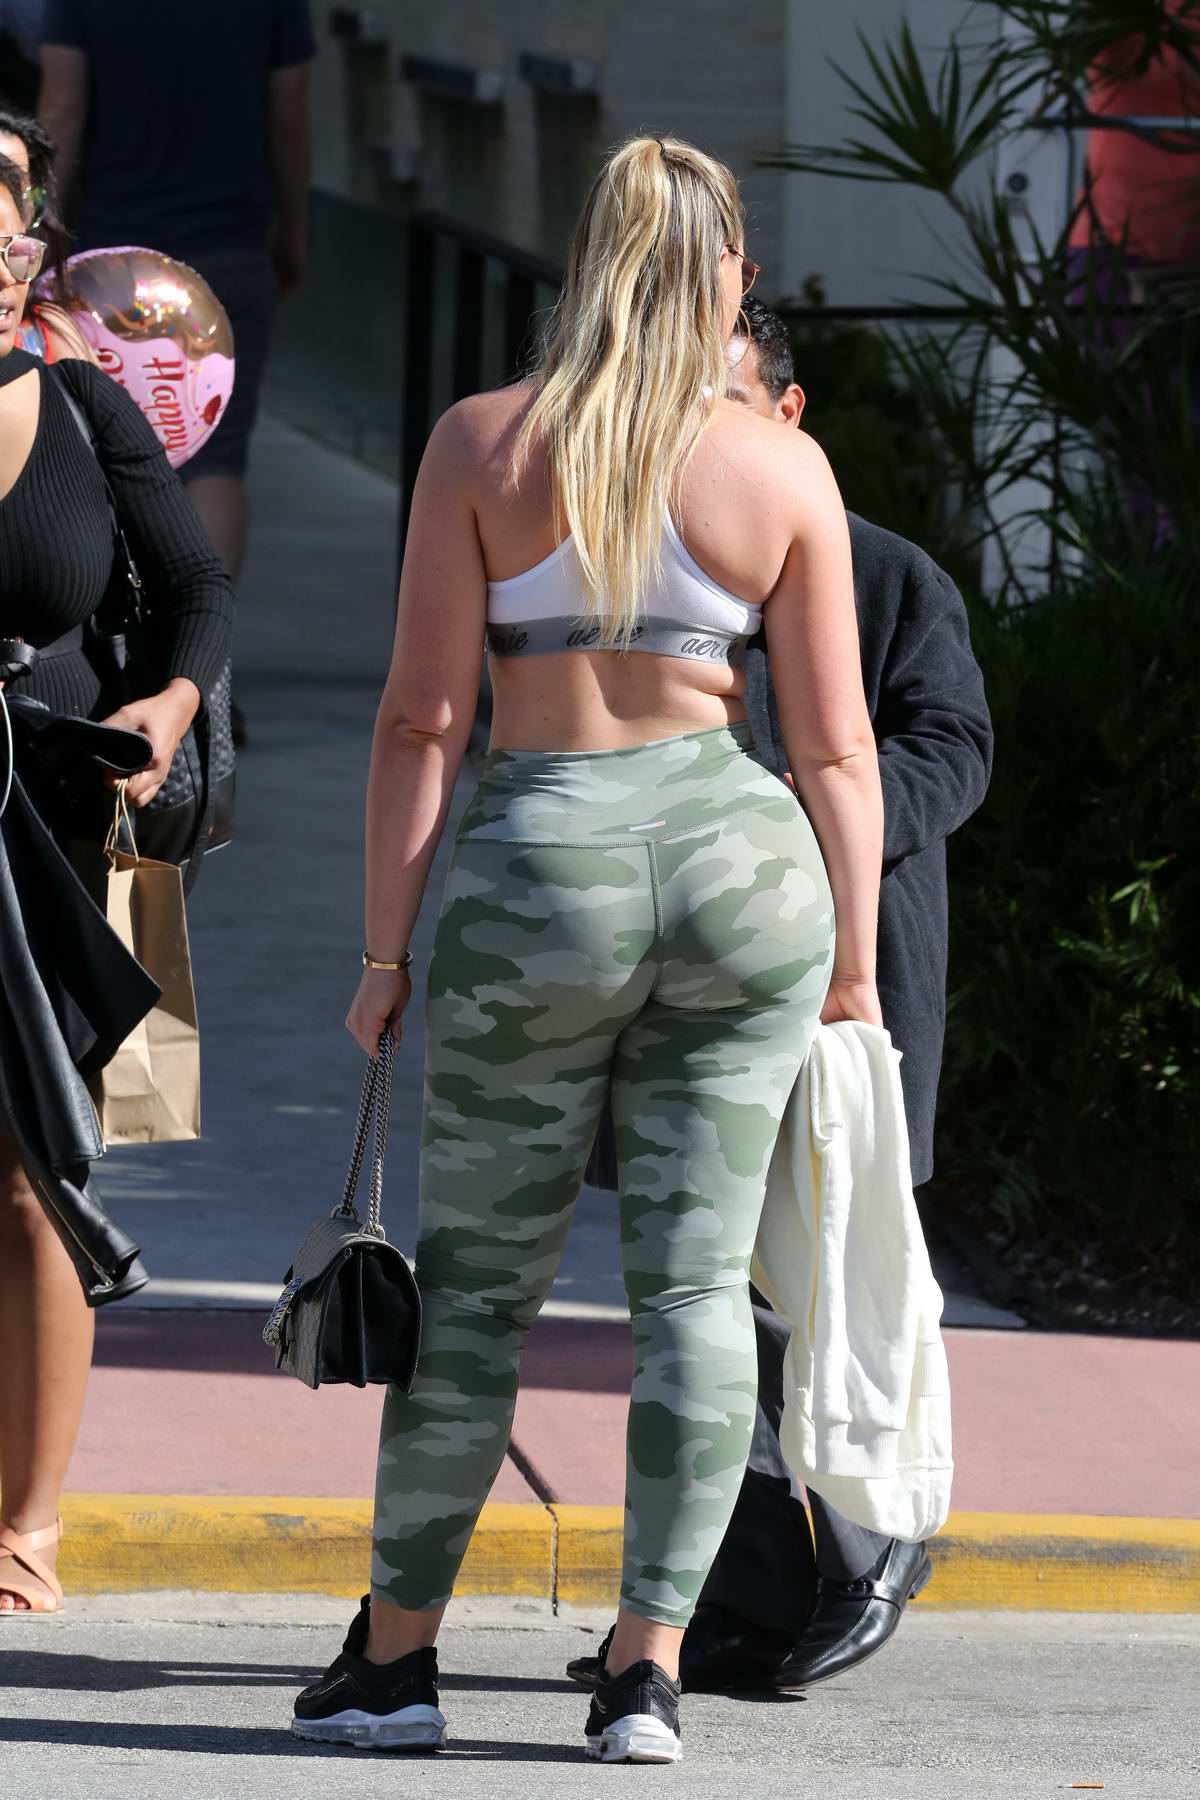 iskra lawrence wearing camo yoga pants and a sports bra as she heads out  with friends in miami-121217_2